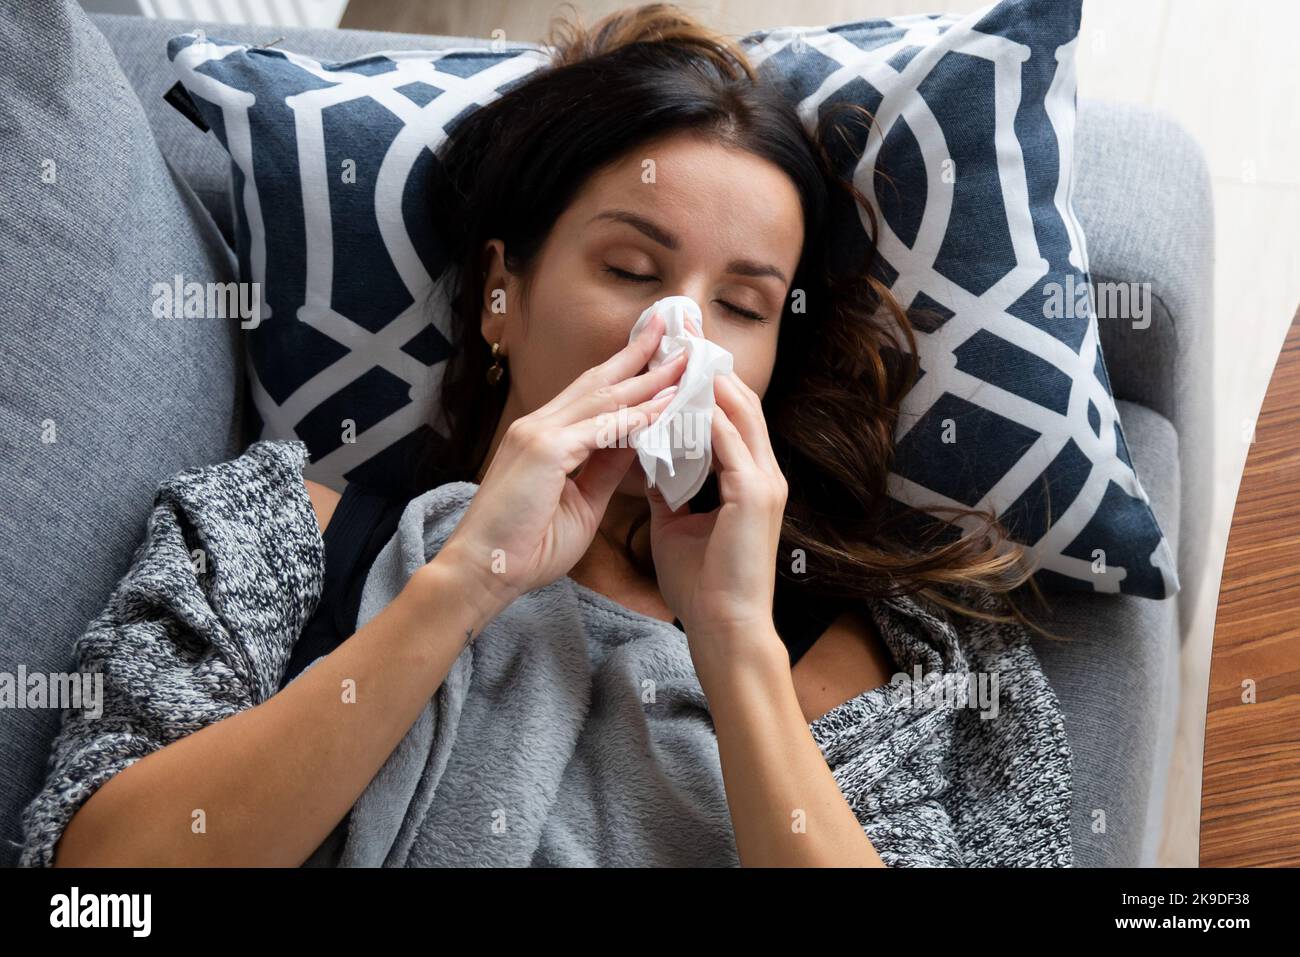 Sick woman blows her nose into a handkerchief, lying on bed Stock Photo